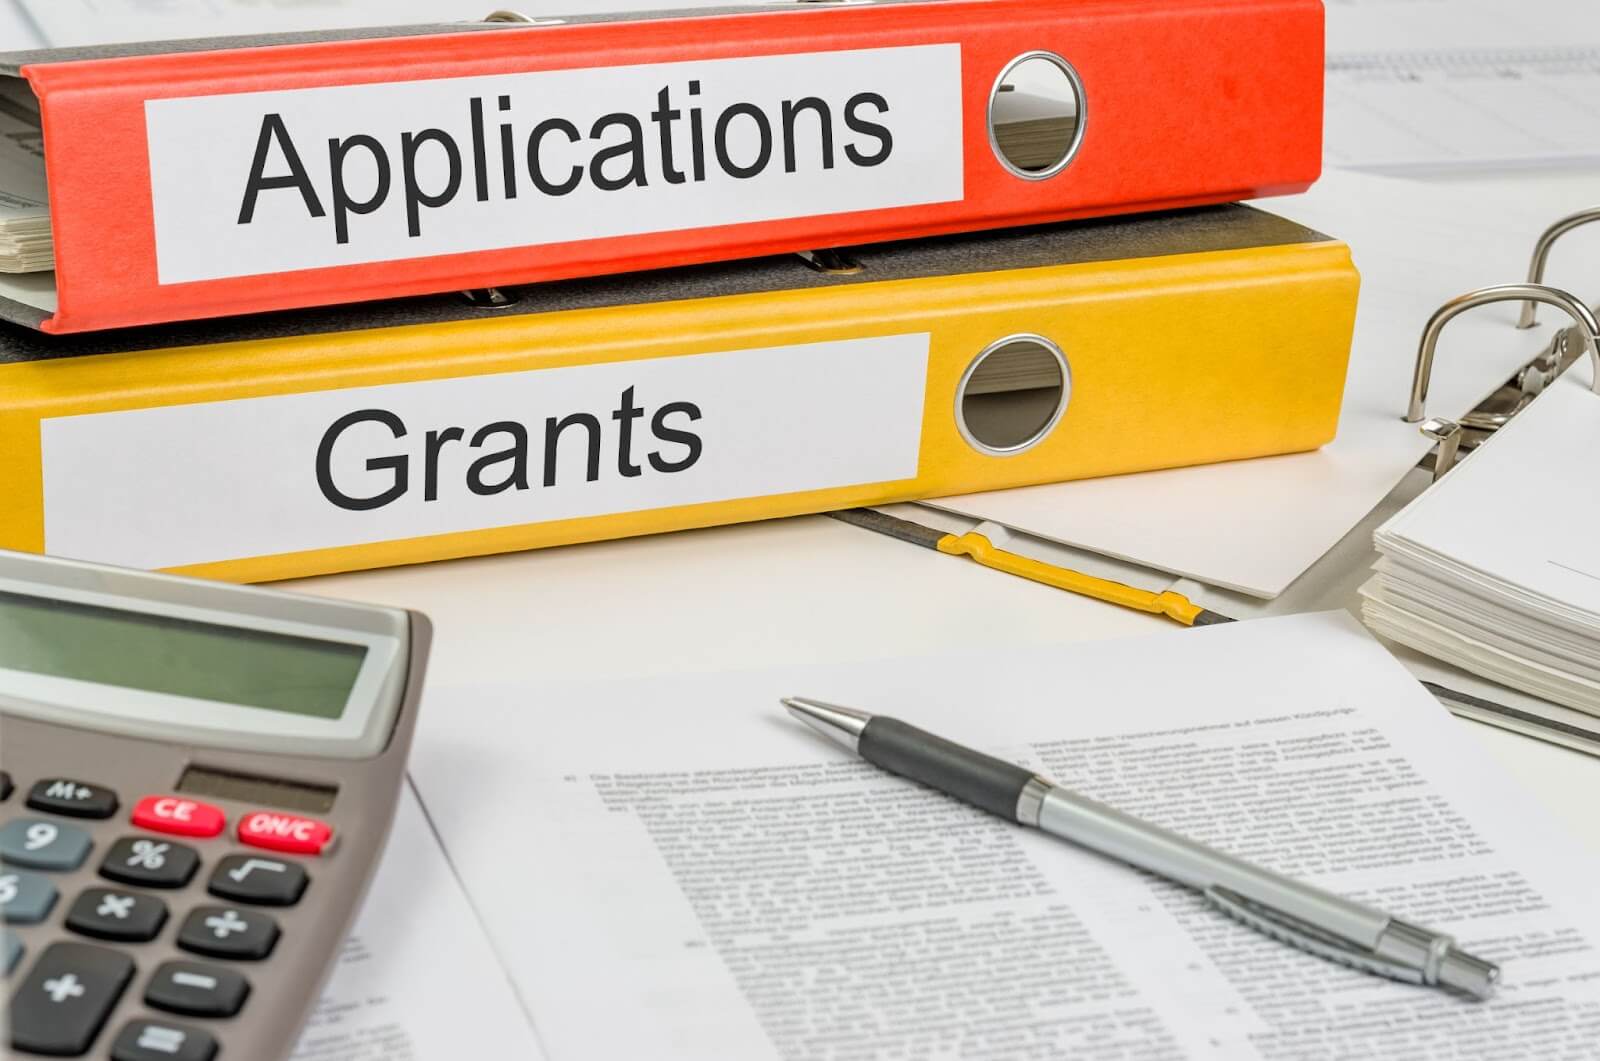 Orange binder with a label that says "Applications" and yellow binder with a label that says "Grants"